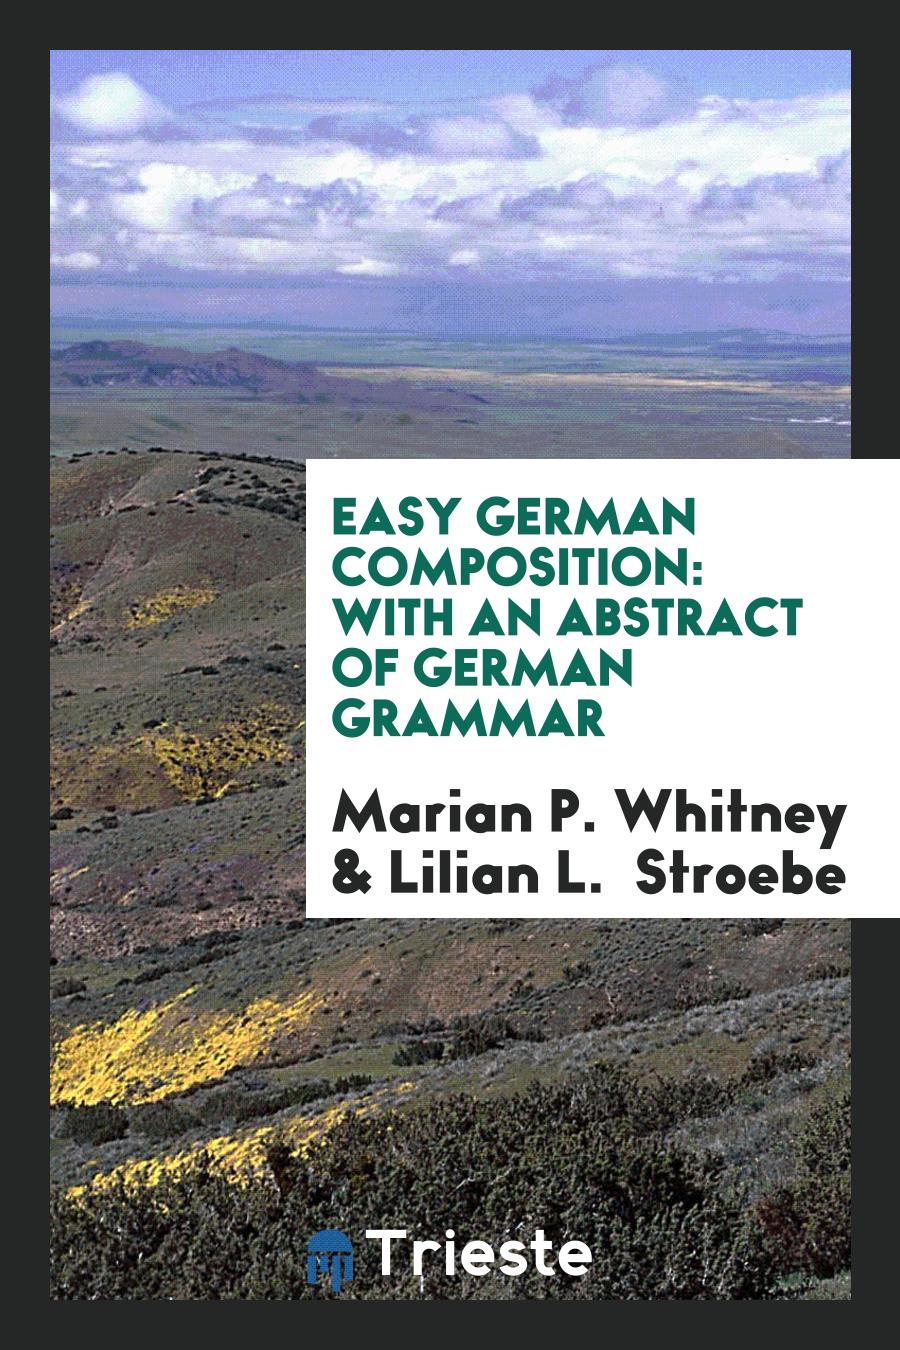 Marian P. Whitney, Lilian L. Stroebe - Easy German Composition: With an Abstract of German Grammar